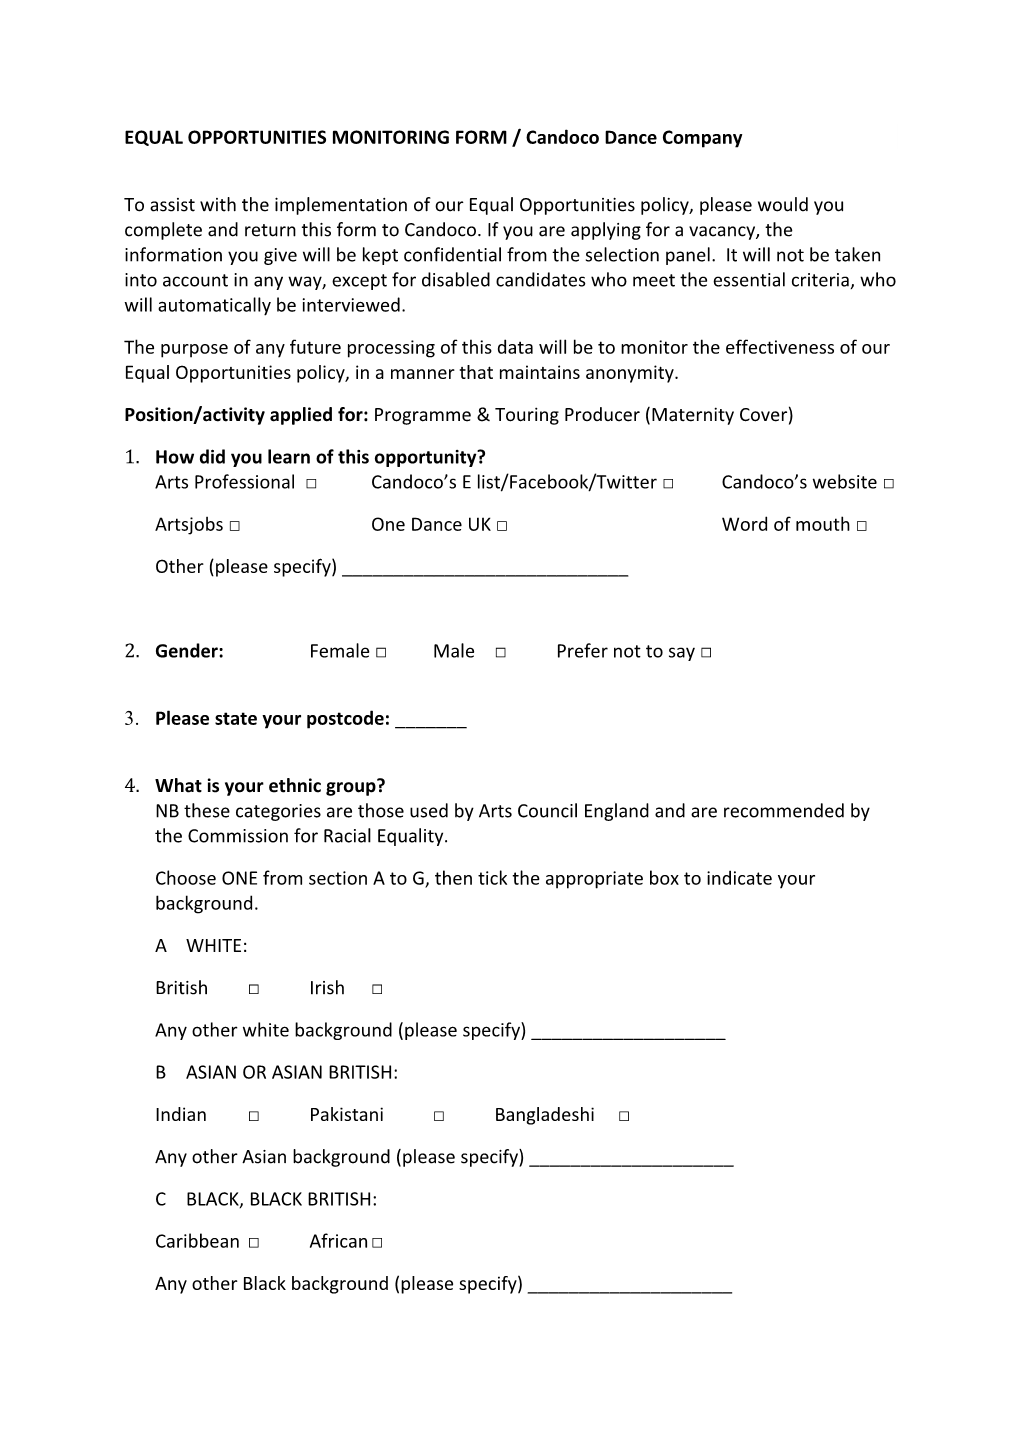 EQUAL OPPORTUNITIES MONITORING FORM / Candoco Dance Company